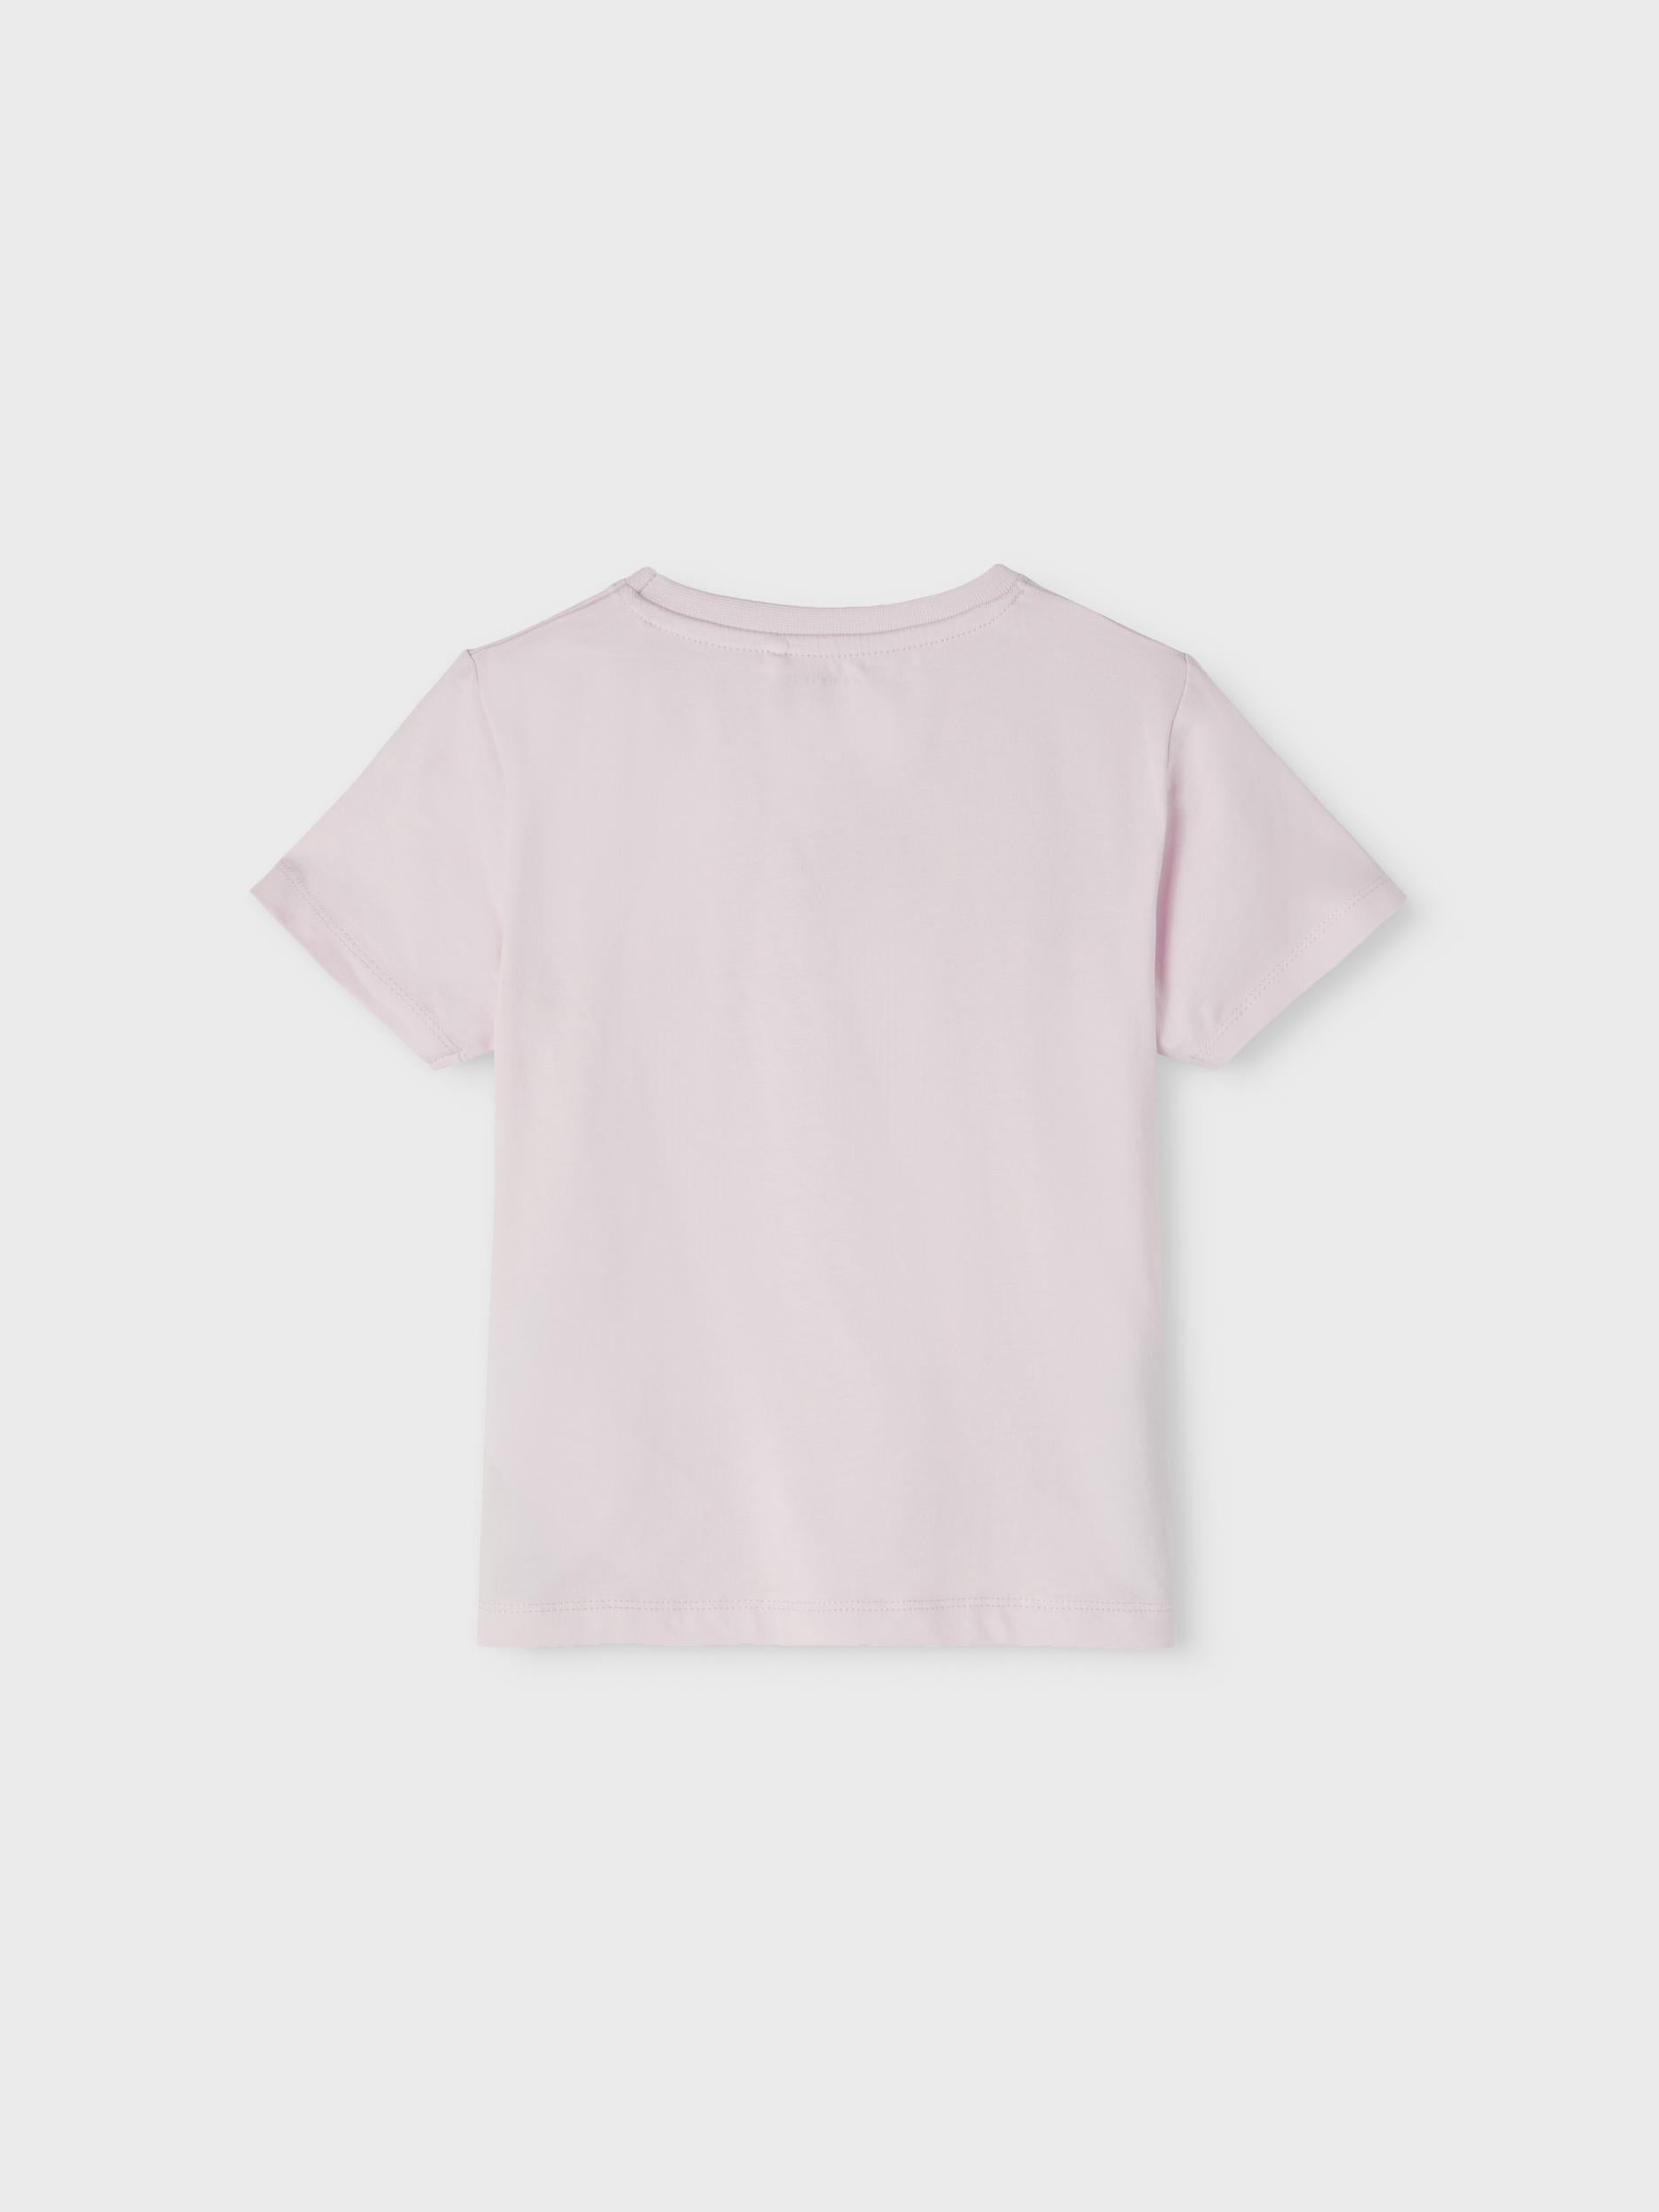 Haley Short Sleeve Top Lilac - Rear View